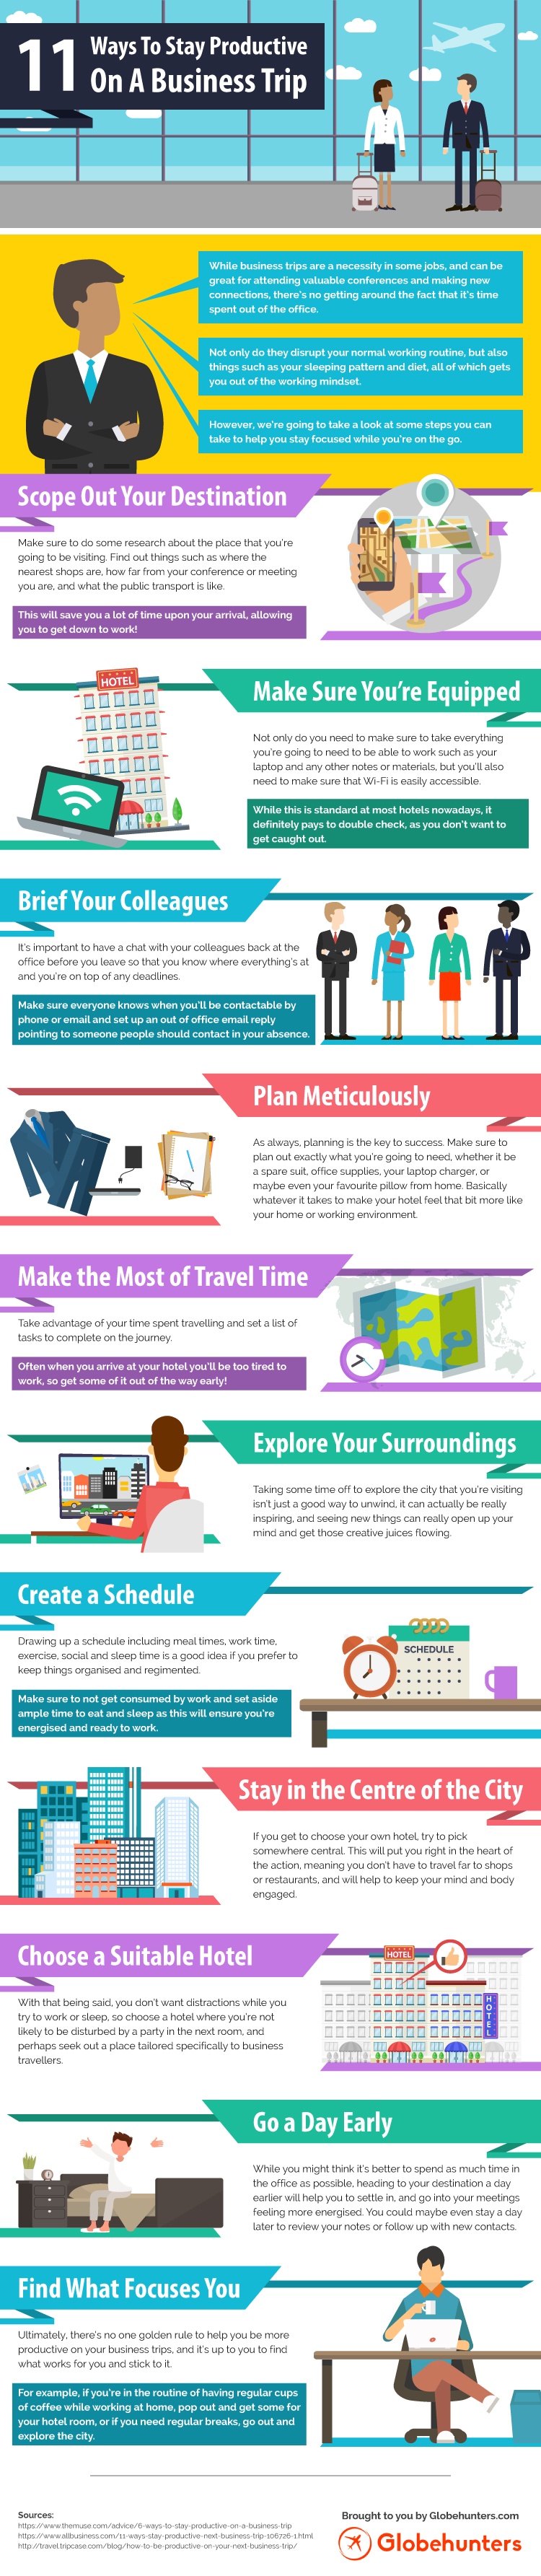 11 Ways To Stay Productive On A Business Trip [Infographic]